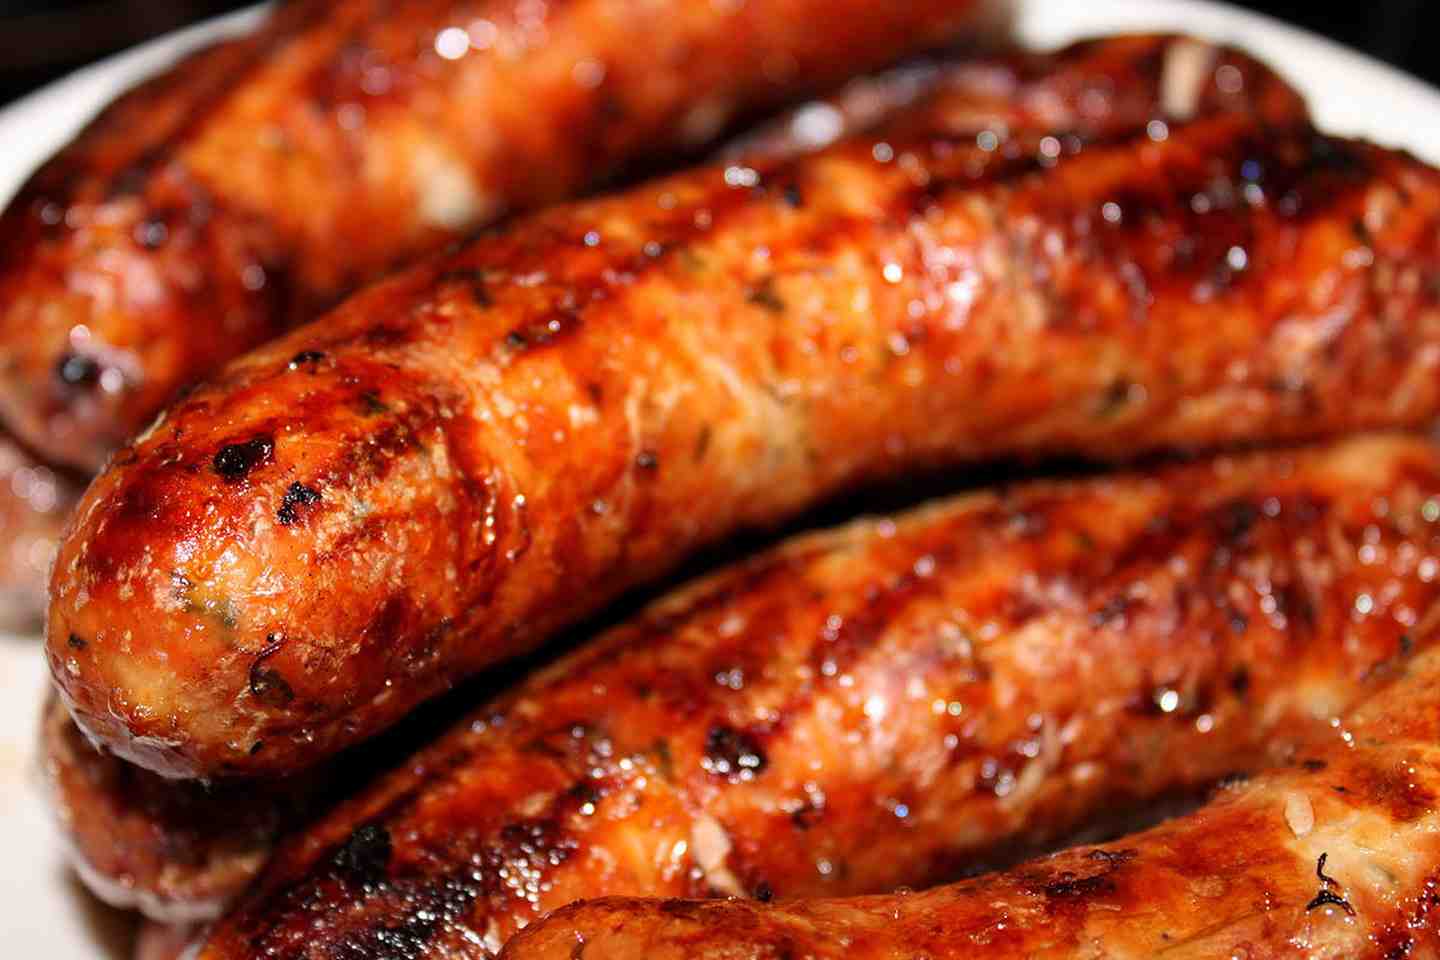 What is the difference between brat and bratwurst?